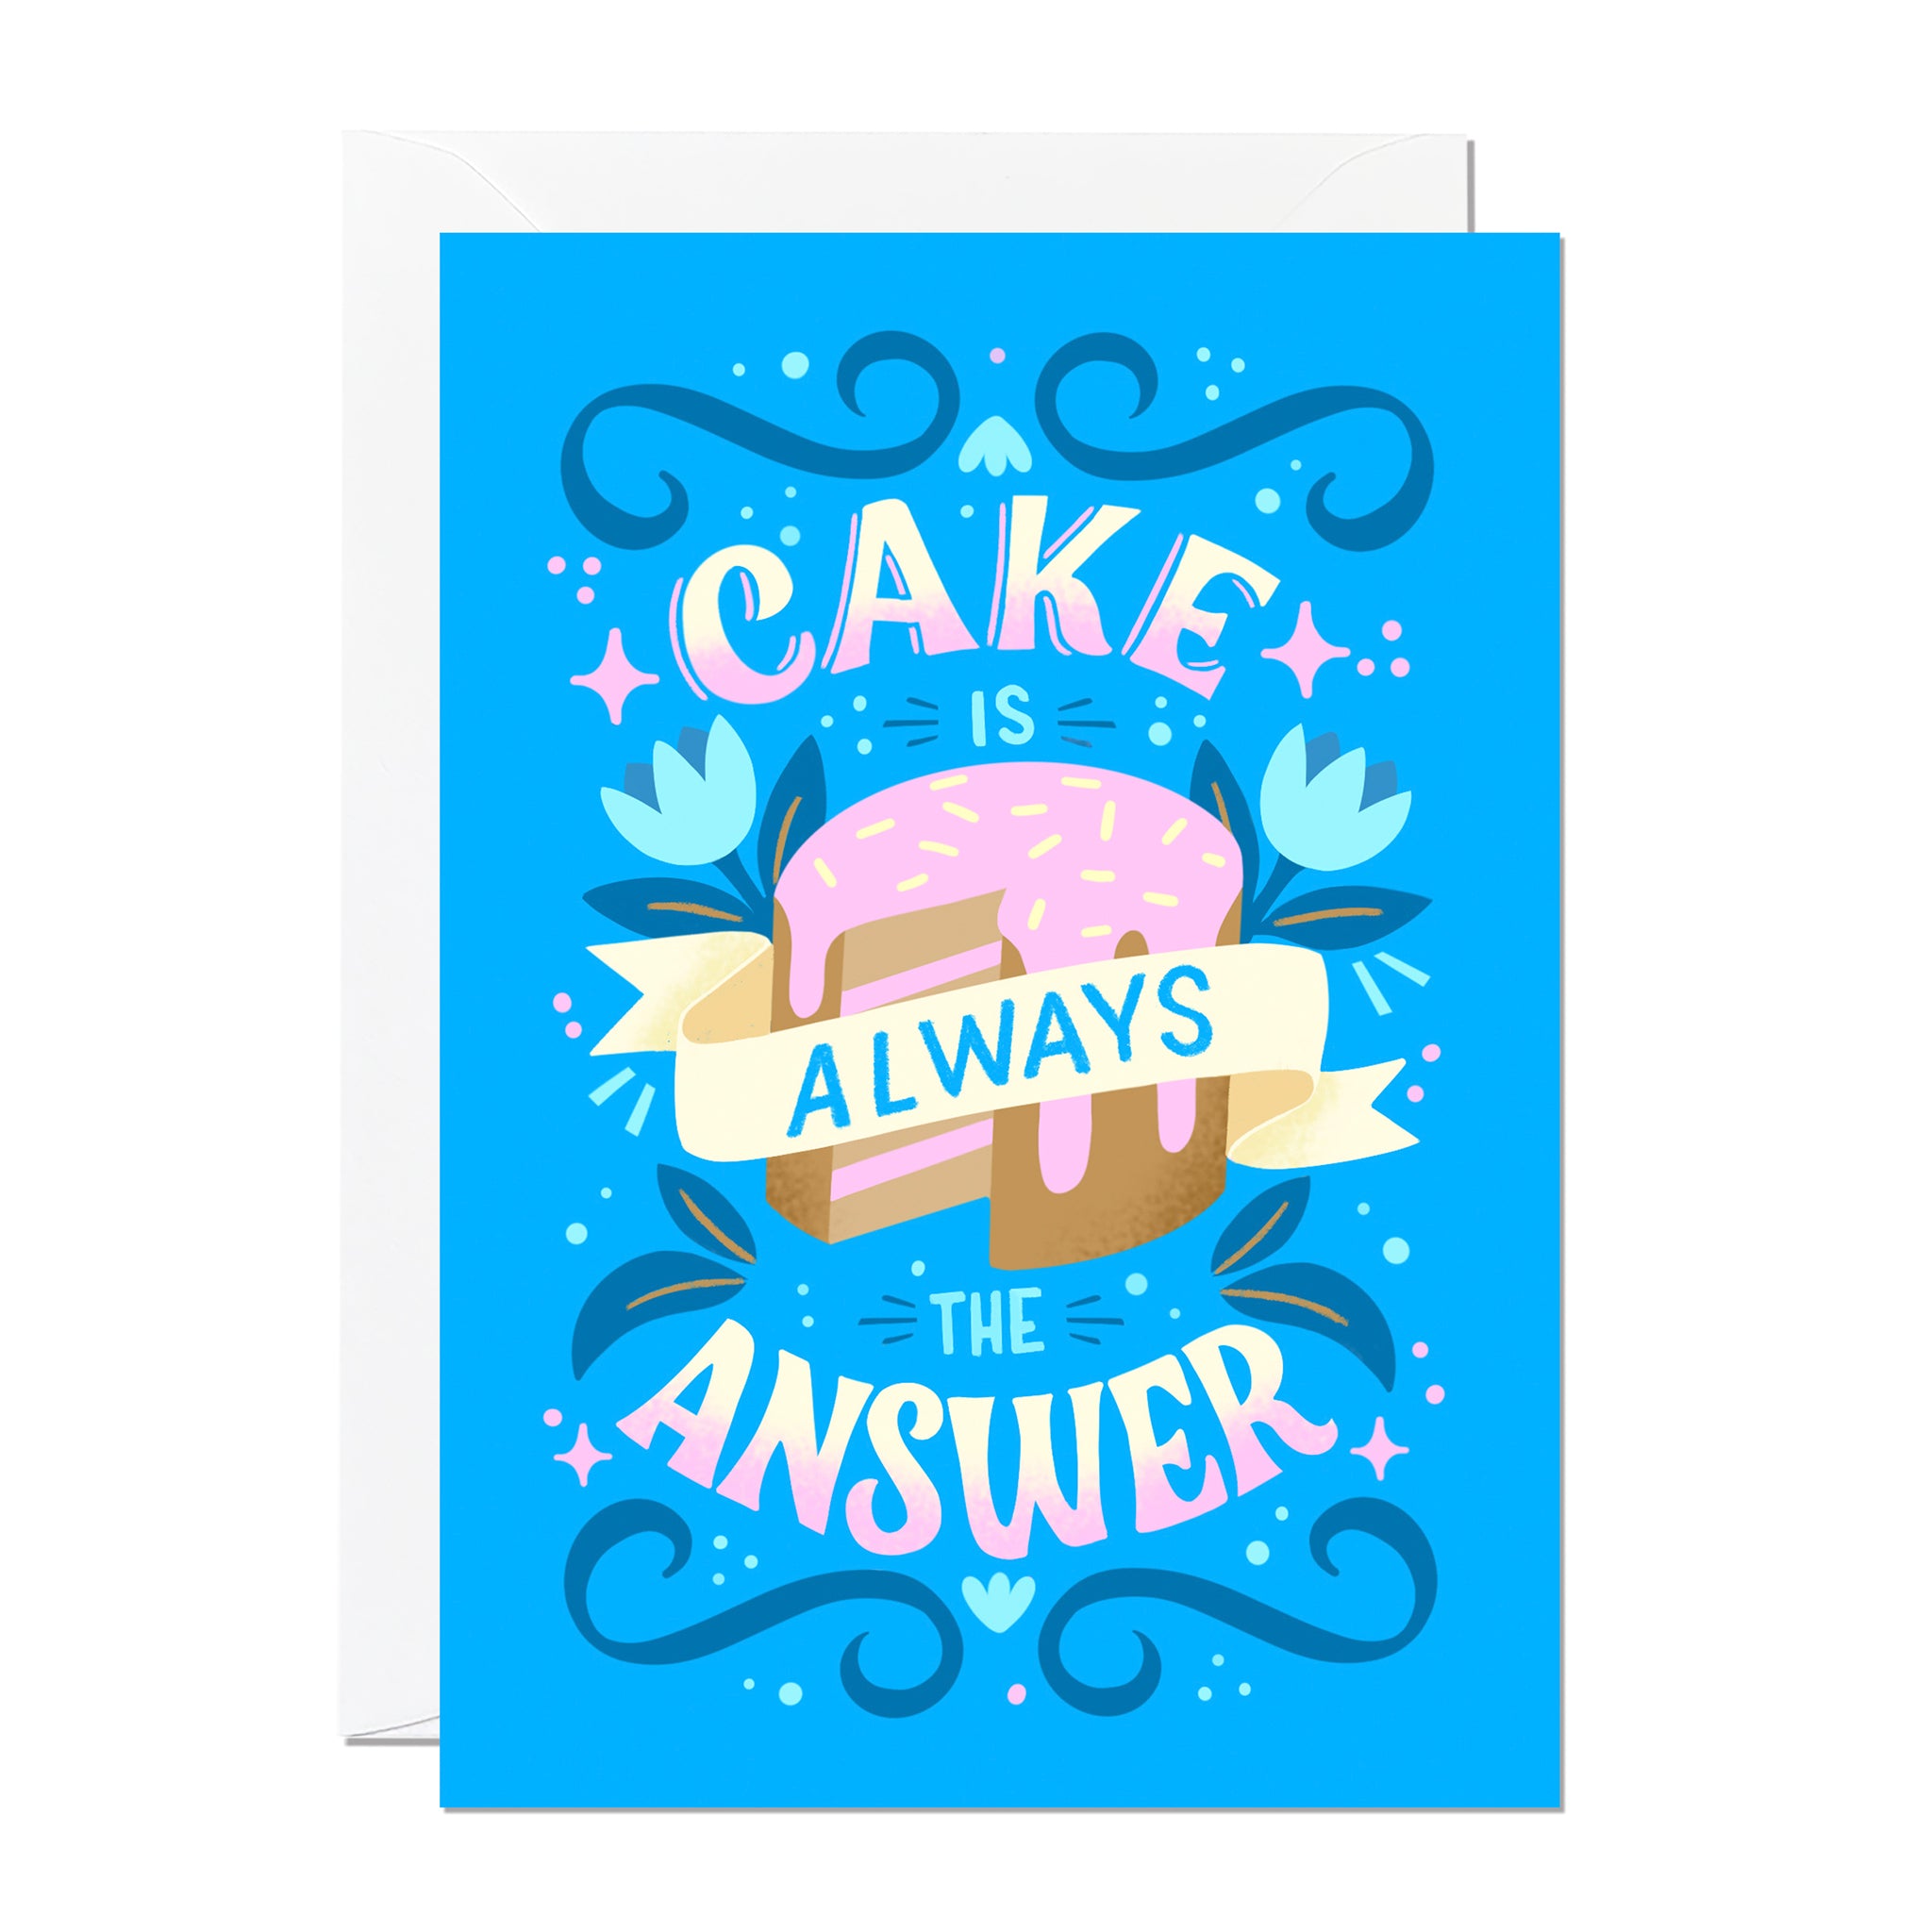 This birthday card has a greeting that reads 'cake is always the answer' and features a blue background with hand lettering and illustration.